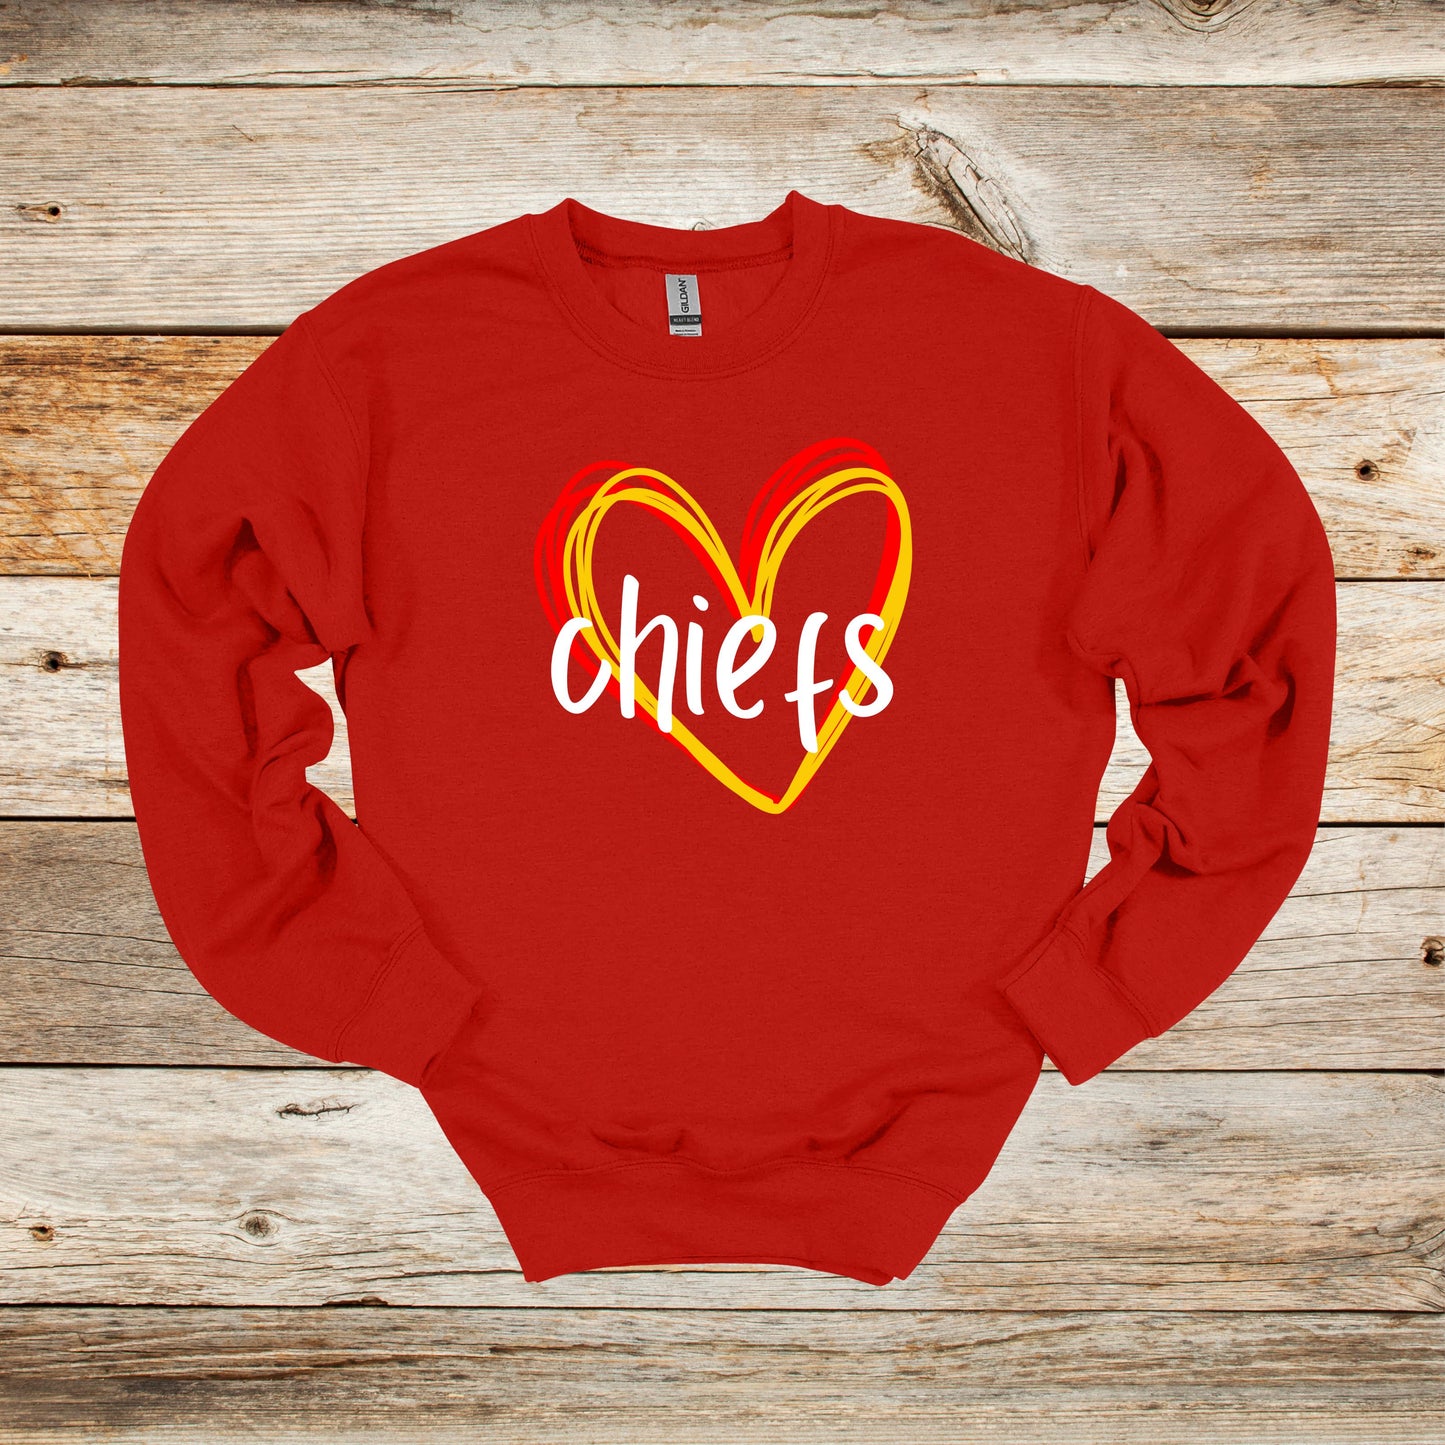 Football Crewneck and Hooded Sweatshirt - Chiefs Football - Adult and Children's Tee Shirts - Sports Hooded Sweatshirt Graphic Avenue Crewneck Sweatshirt Red Adult Small